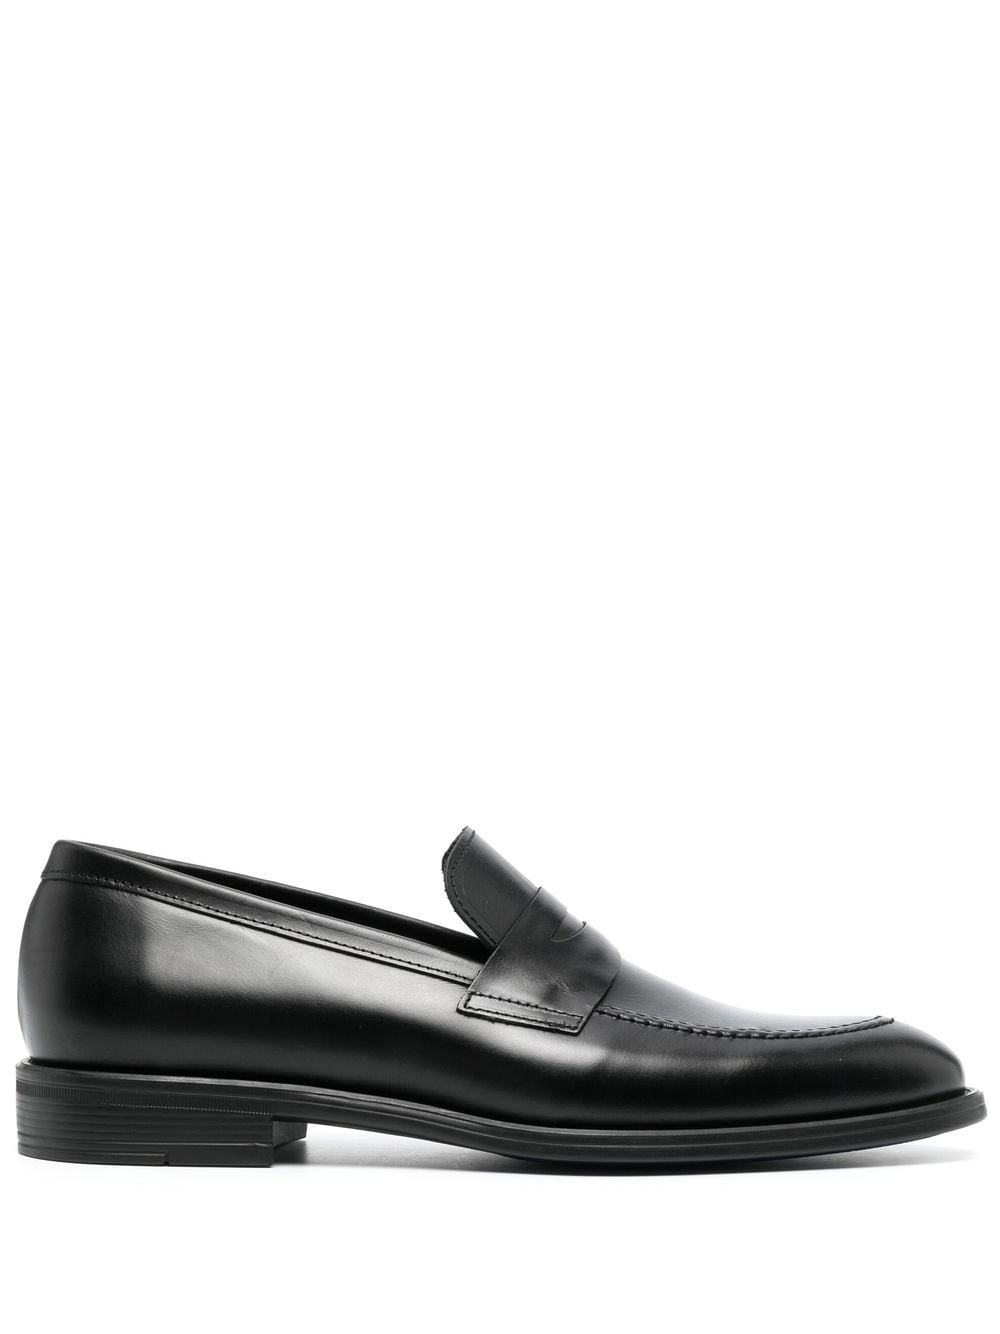 PS Paul Smith almond-toe leather penny loafers - Black von PS Paul Smith